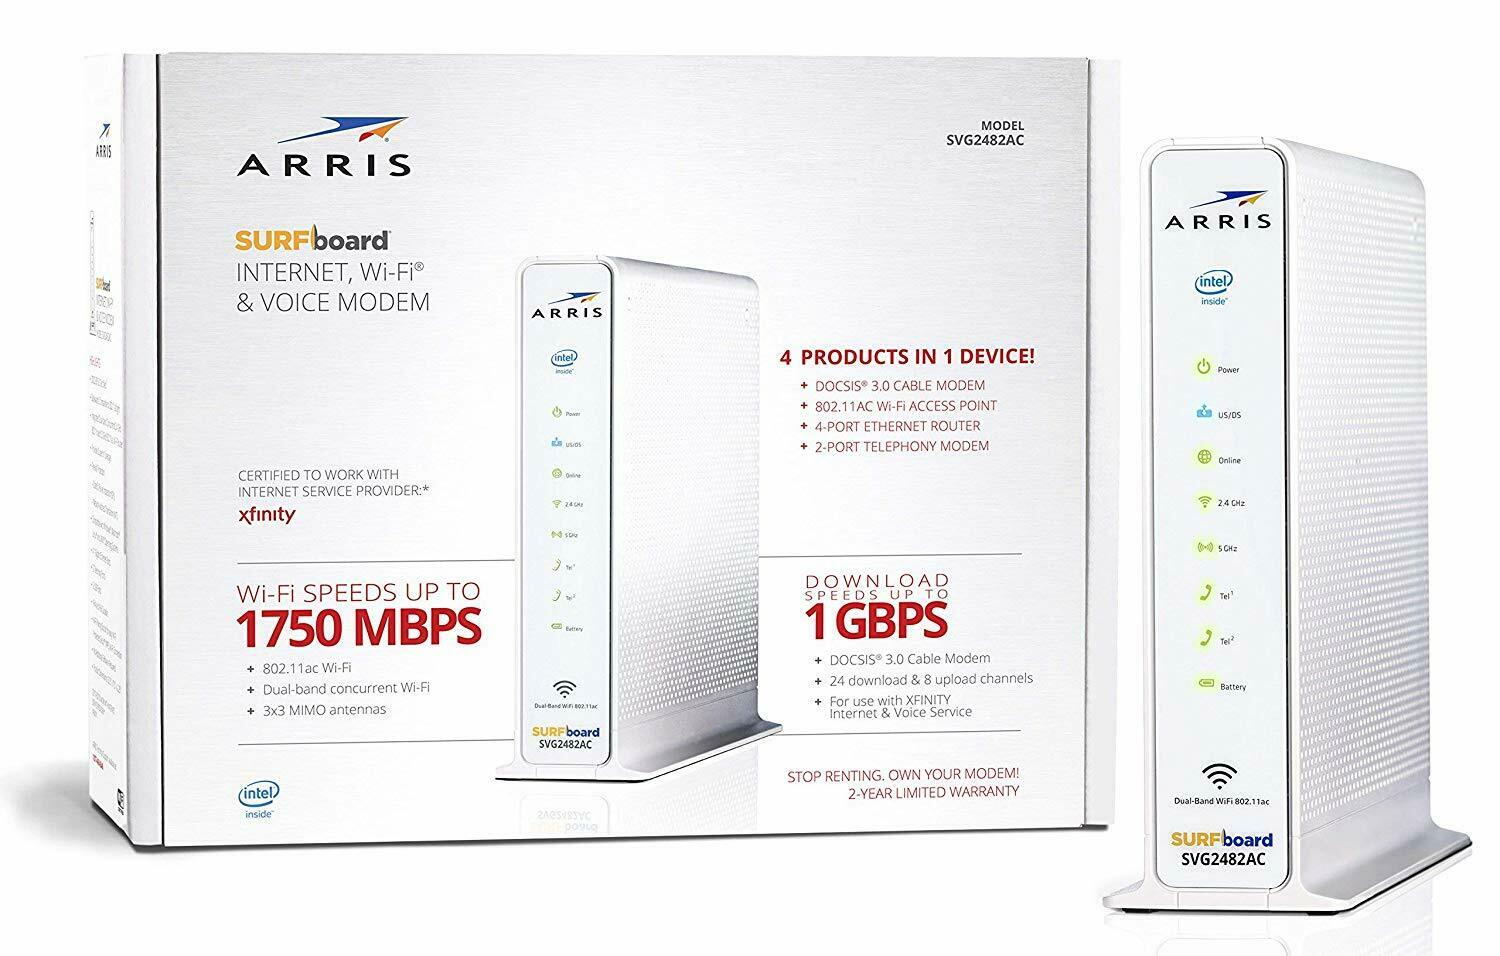 Arris Surfboard Svg2482ac Cable Modem Router 3-in-1 Wifi Internet (renewed)